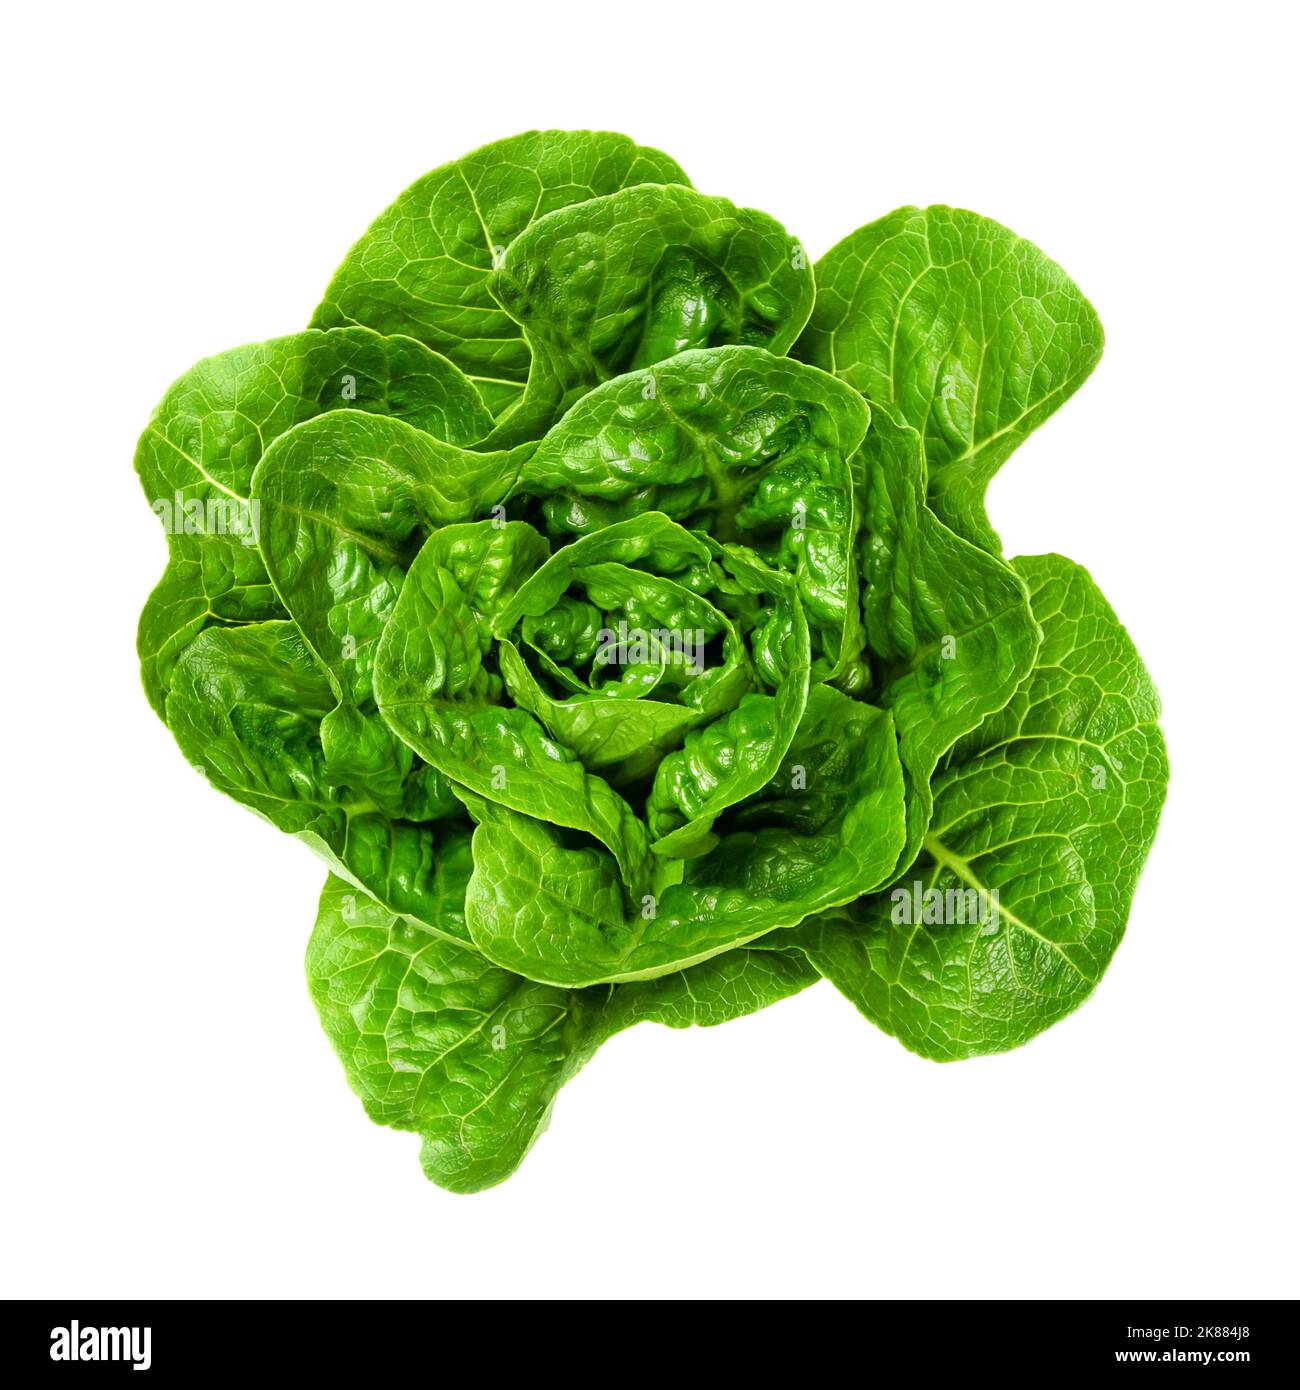 Fresh and green Romaine lettuce heart, from above. Also cos lettuce, a tall lettuce head of sturdy dark green leaves with firm ribs down the center. Stock Photo